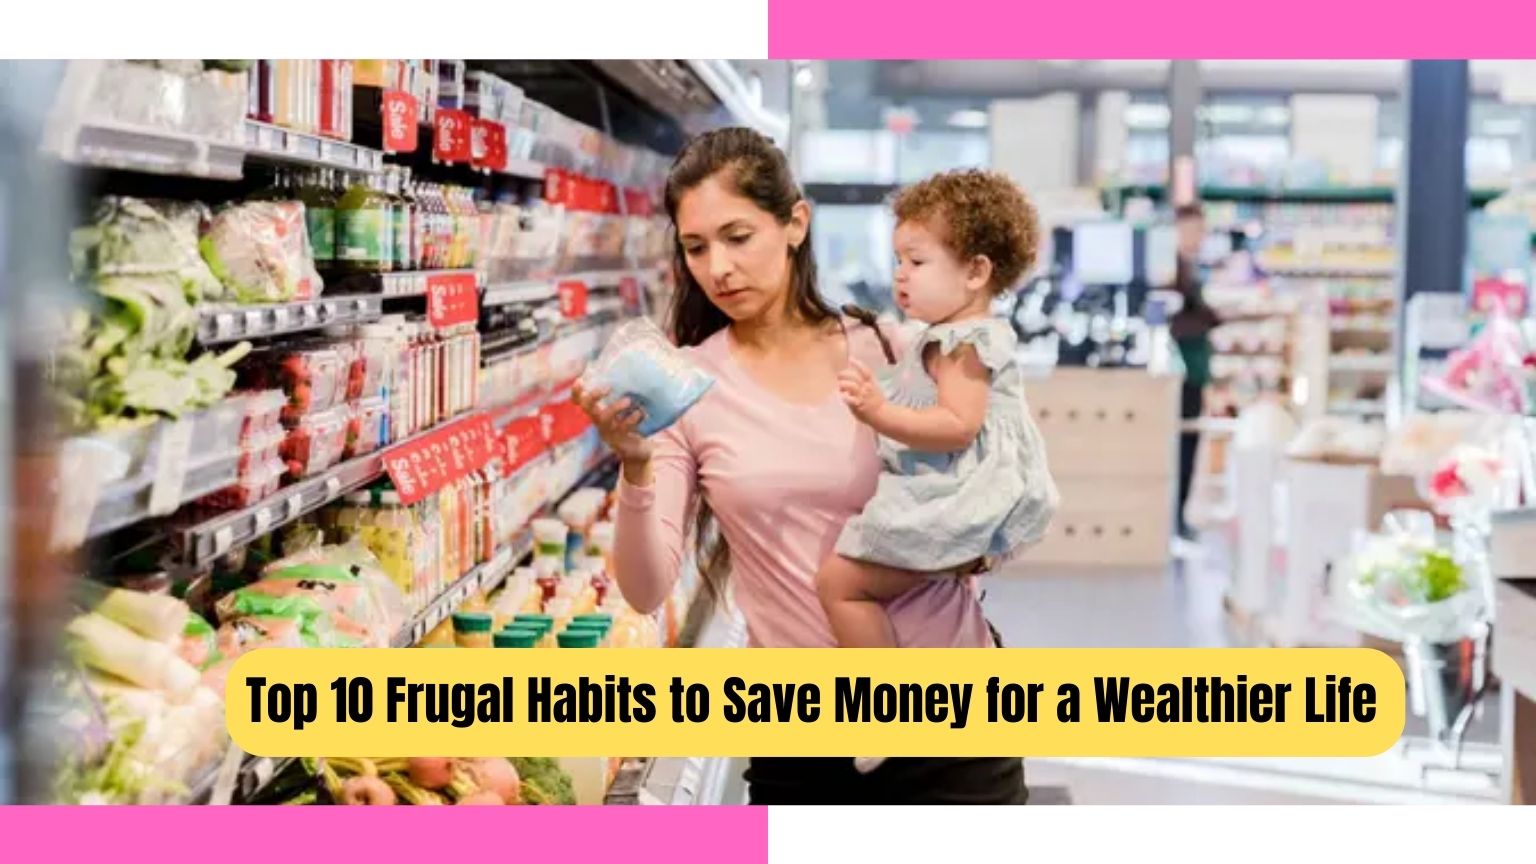 Top 10 Frugal Habits to Save Money for a Wealthier Life, Frugal Habits to Save Money, Frugal Habits,